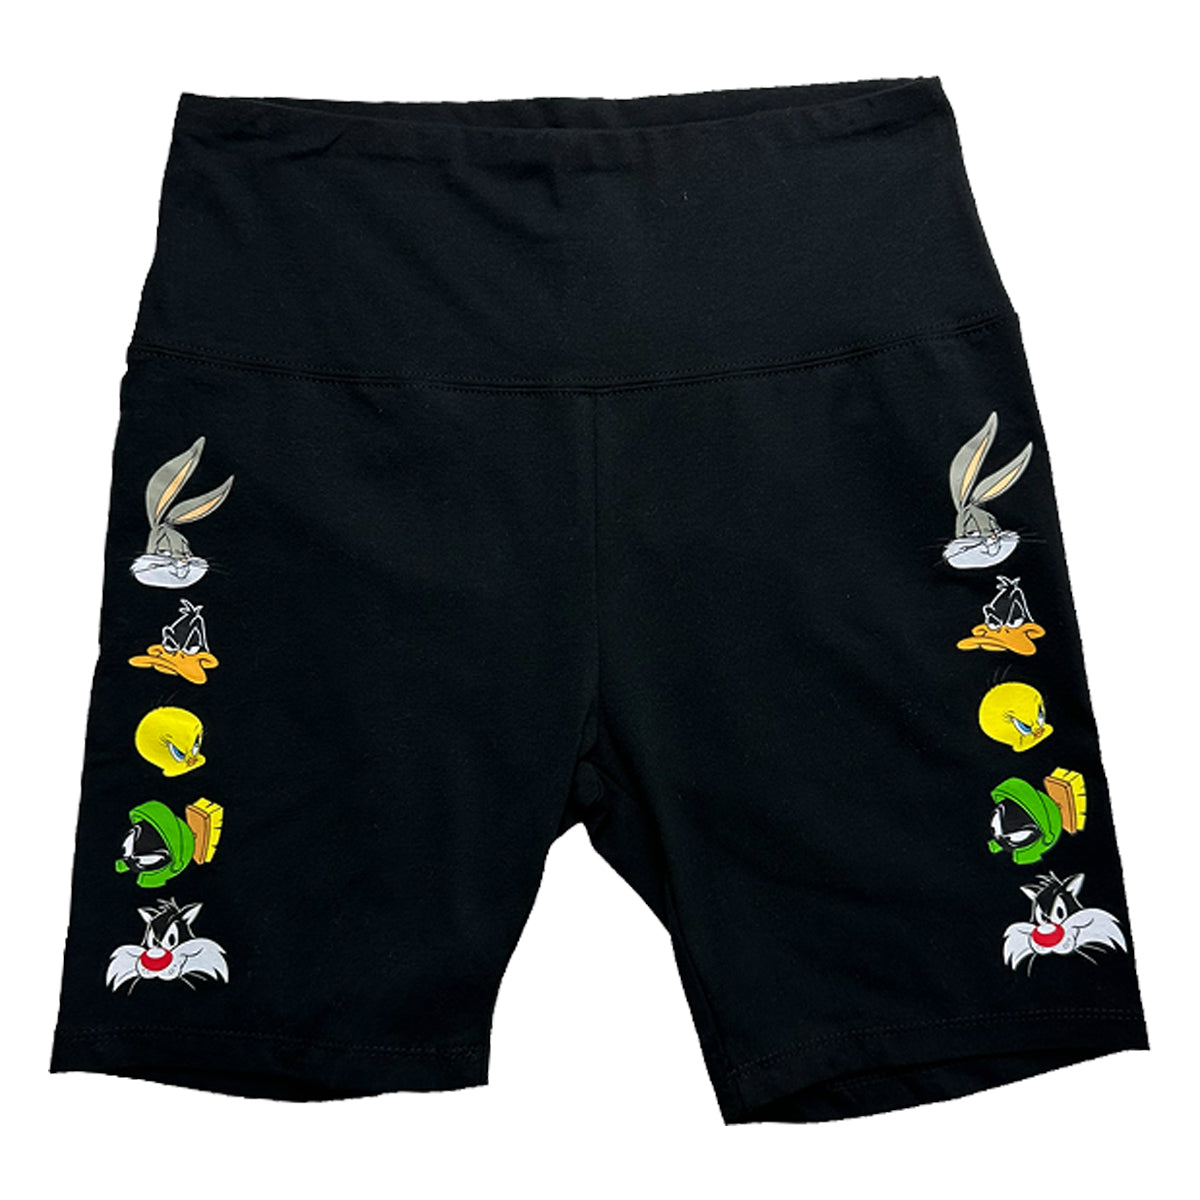 LOONEY TUNES Junior Fleece Cropped Hoodie with Shorts (Pack of 6)